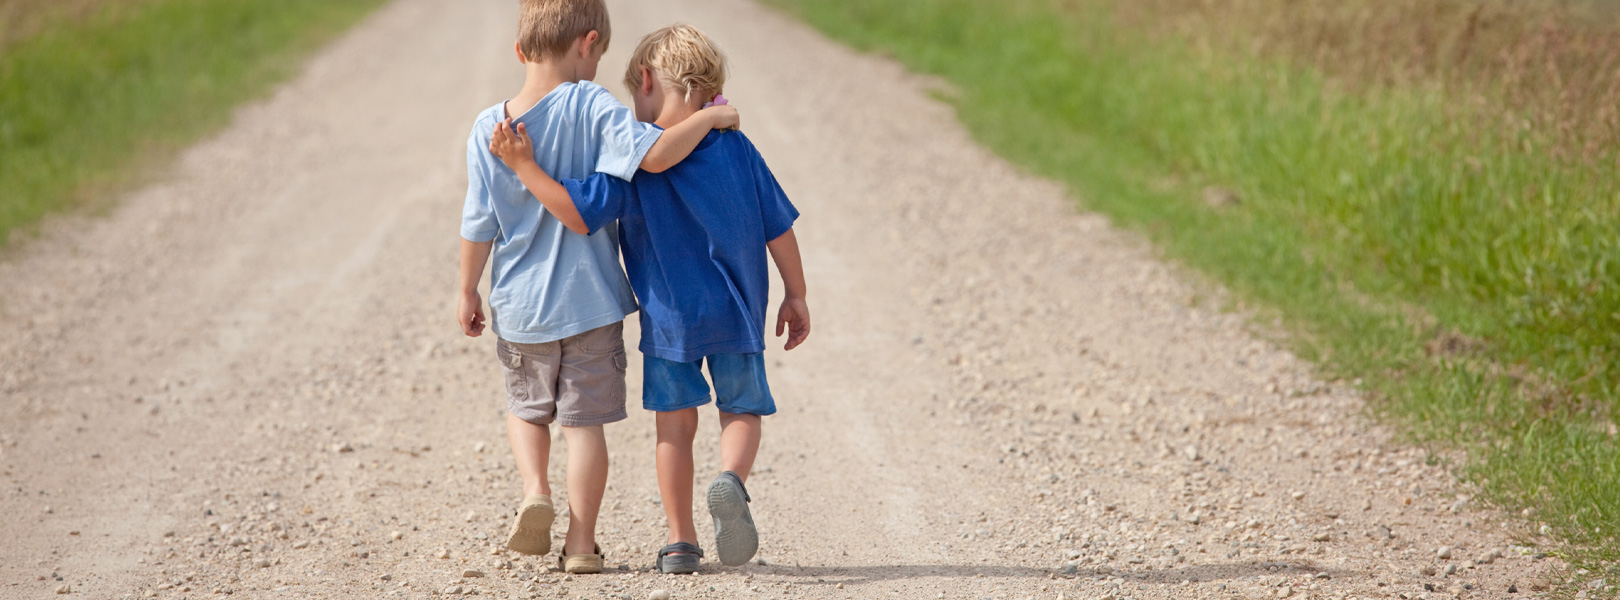 Two boys walking down a dirt road, arms around each others shoulders